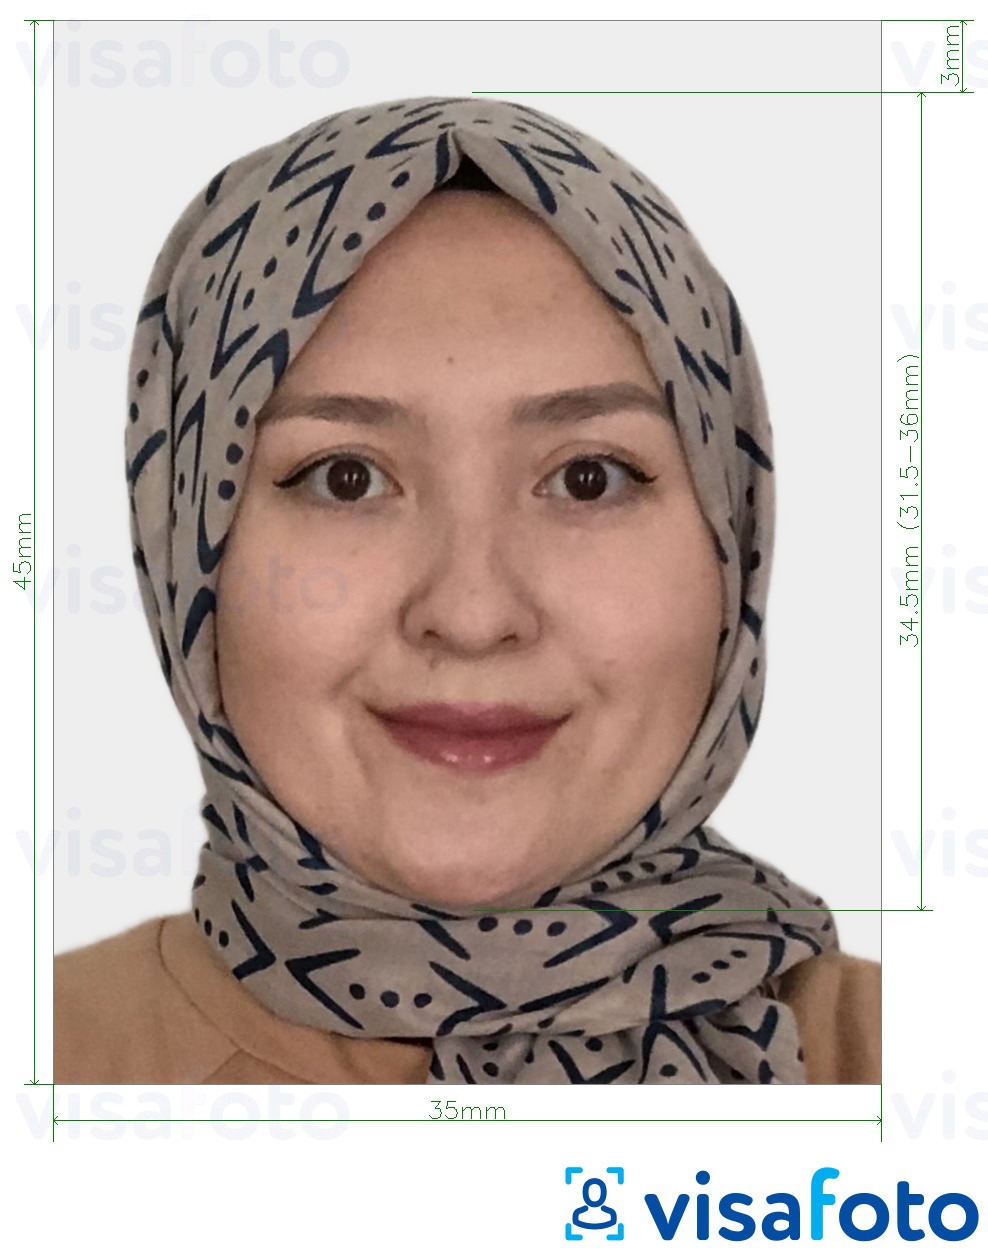 Example of photo for Kazakhstan Visa 35x45 mm (3.5x4.5 cm) with exact size specification